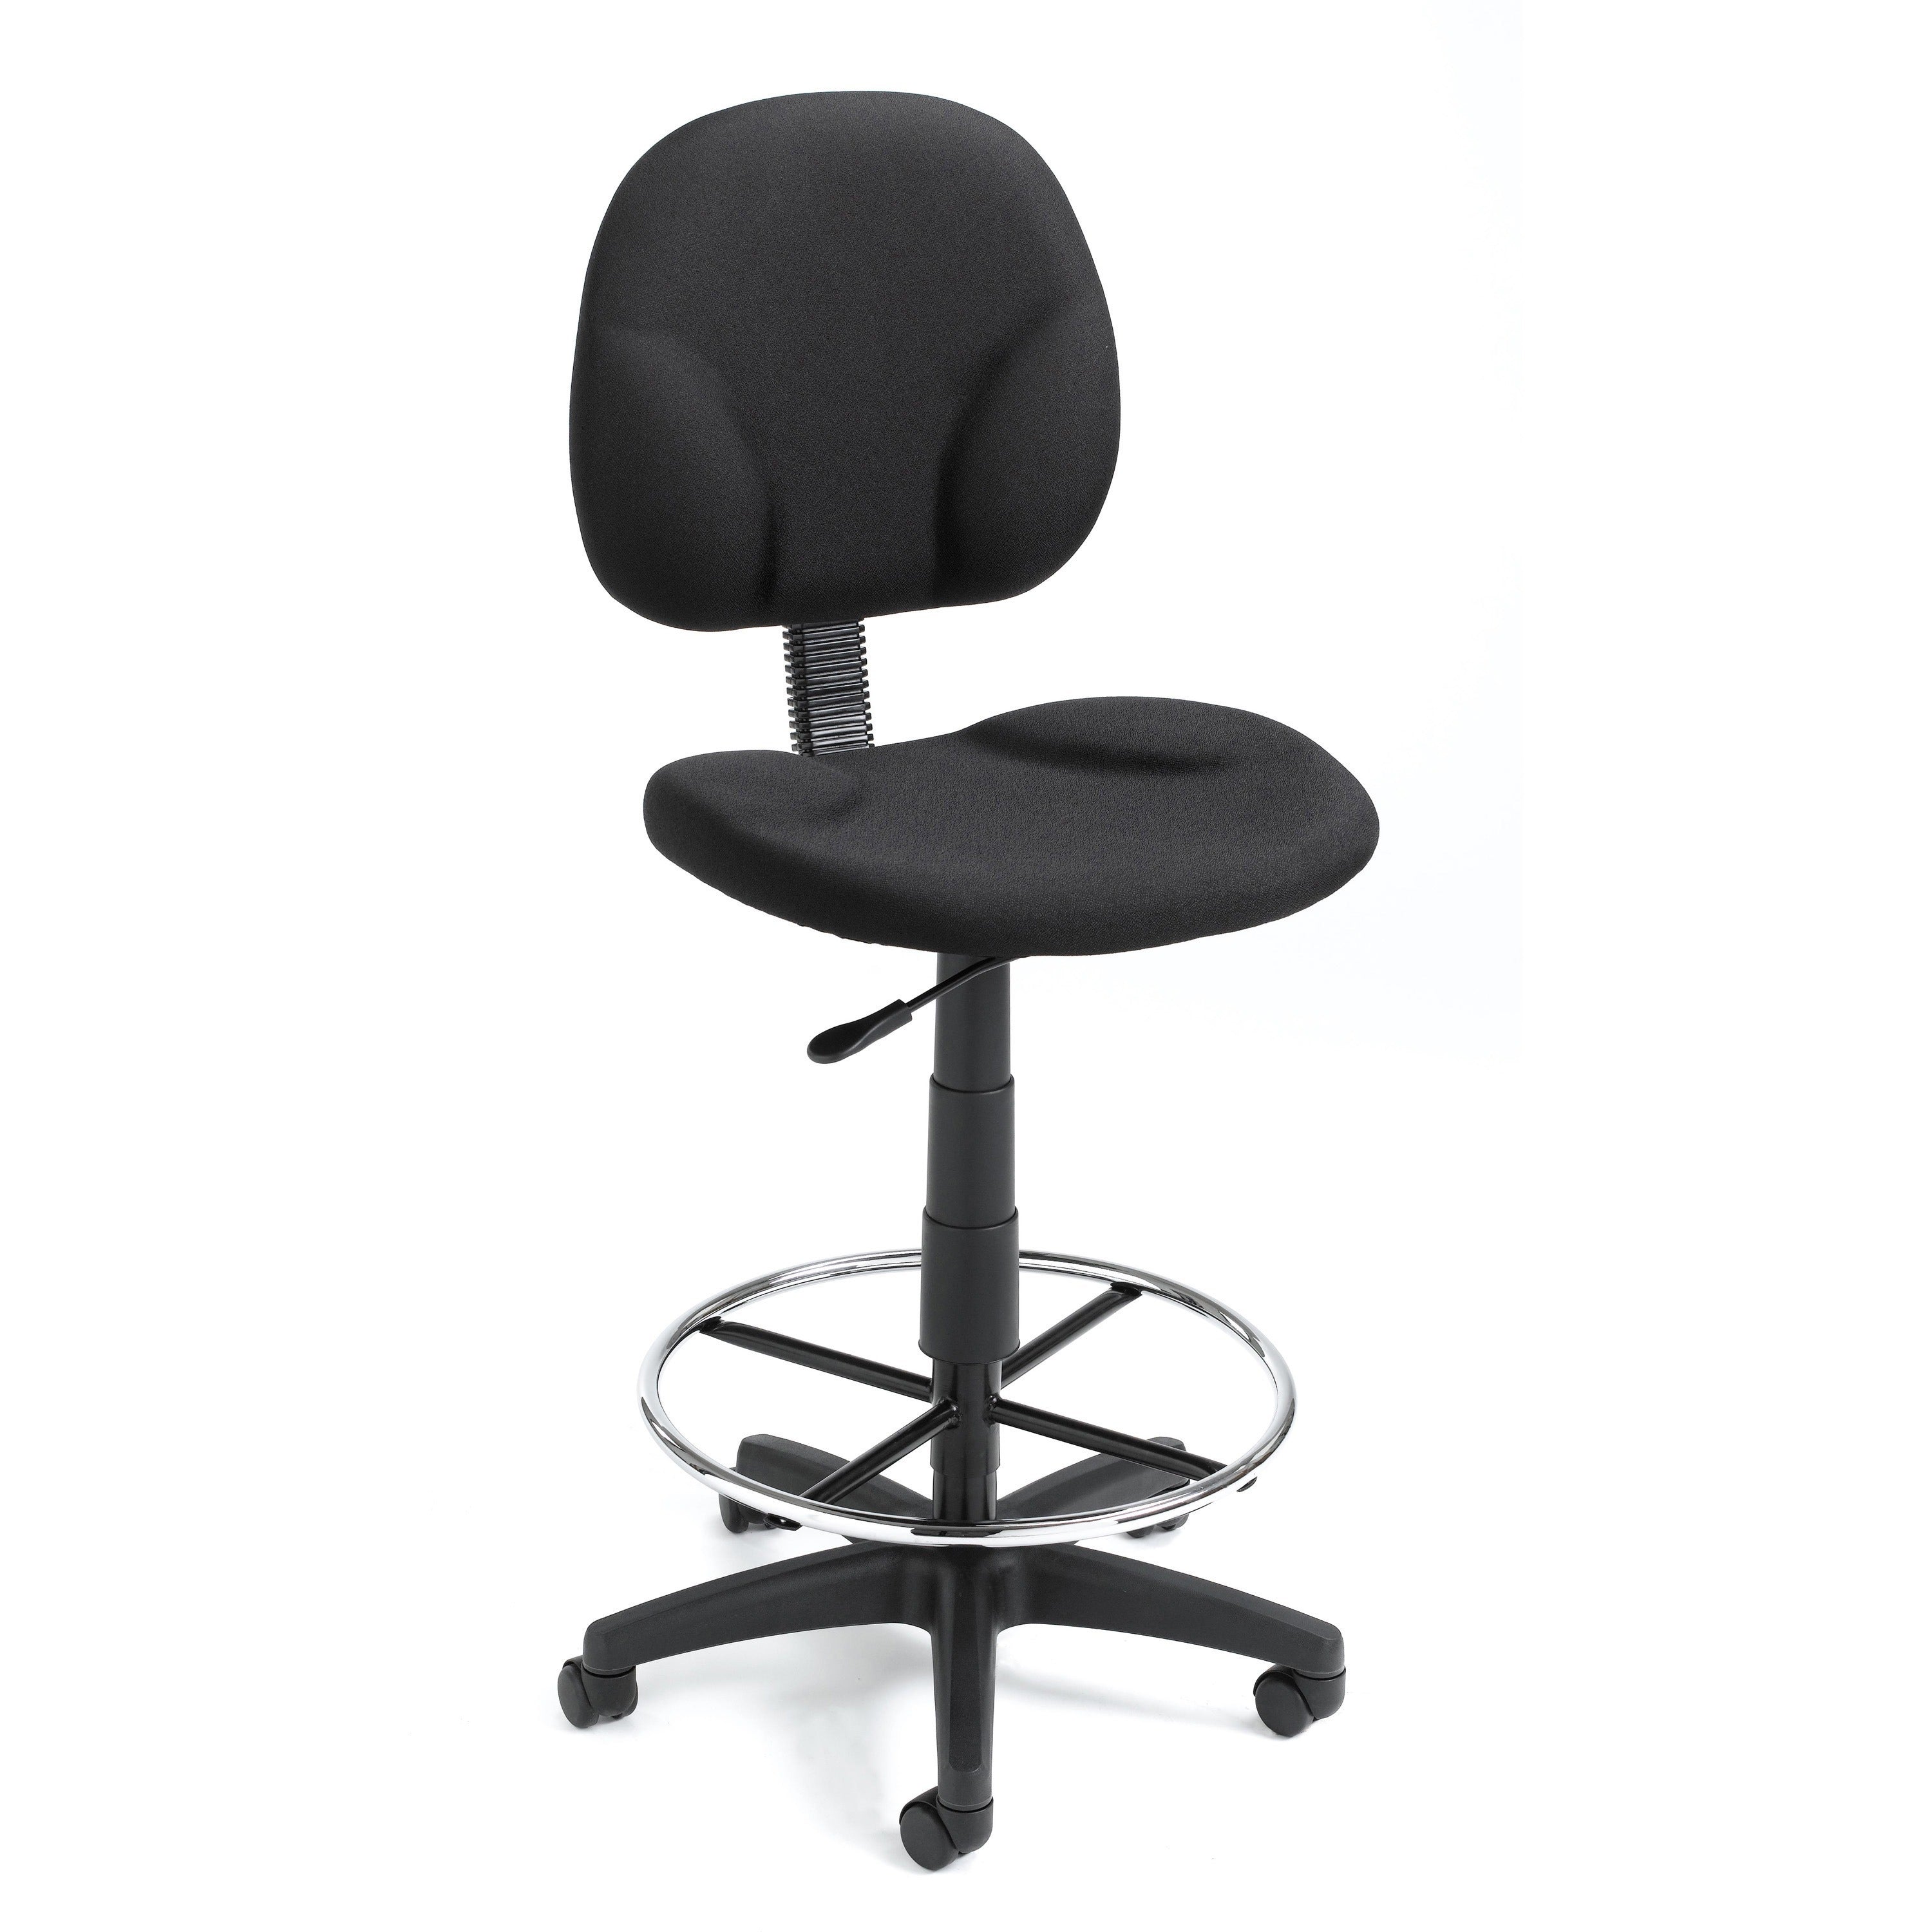 Boss Stand Up Fabric Drafting Stool with Foot Rest, Black - Black Crepe Fabric Seat - Black Crepe Fabric Back - 5-star Base - 1 Each - 1